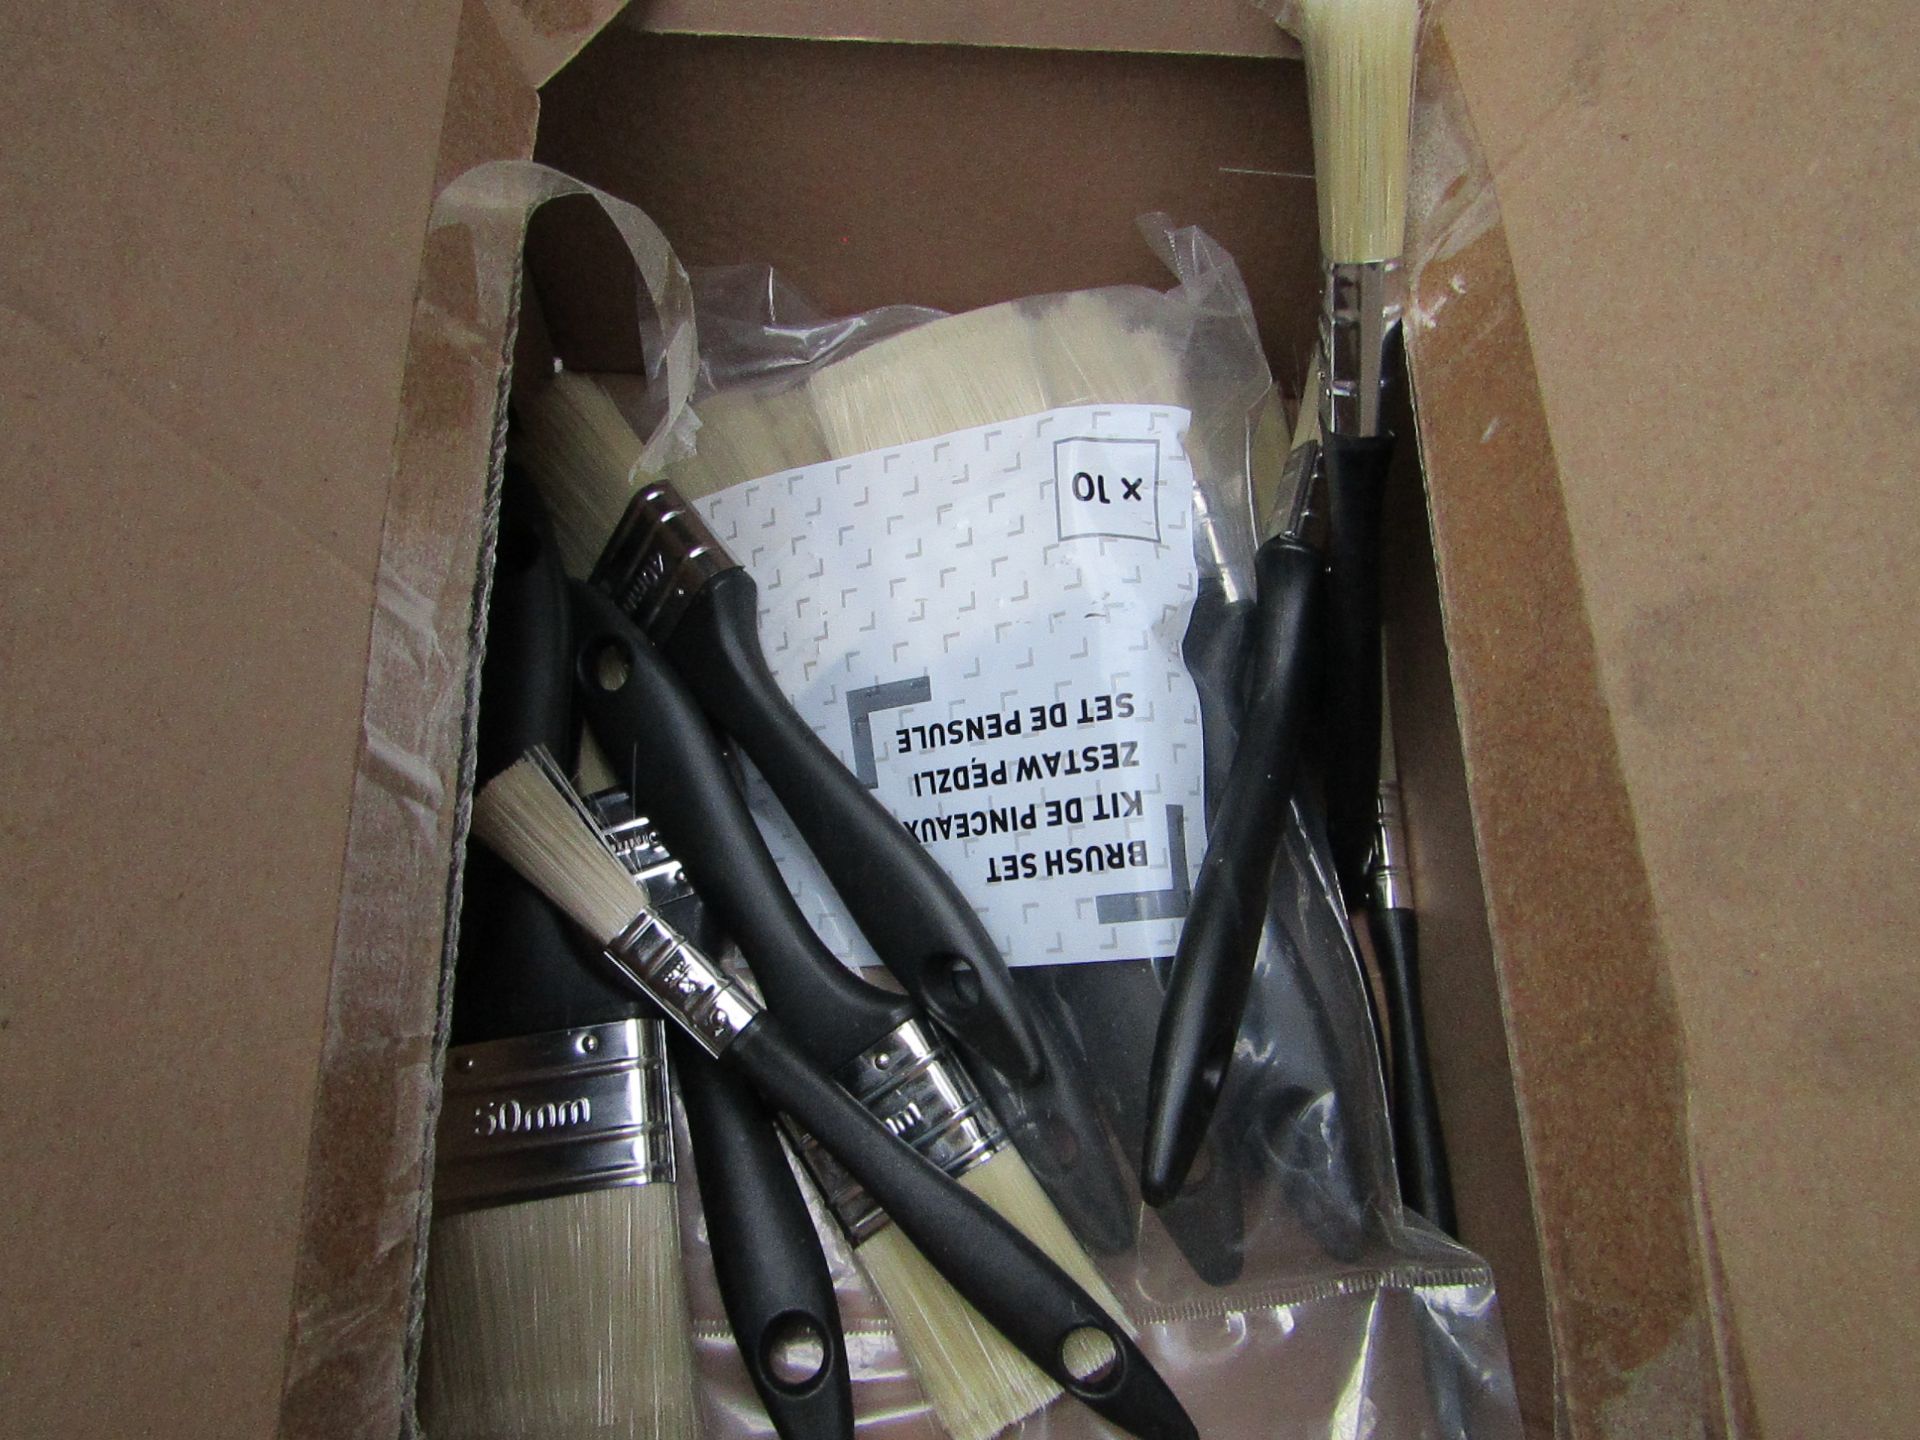 Box Containing 20 Paint Brushes - Unused & Packaged.